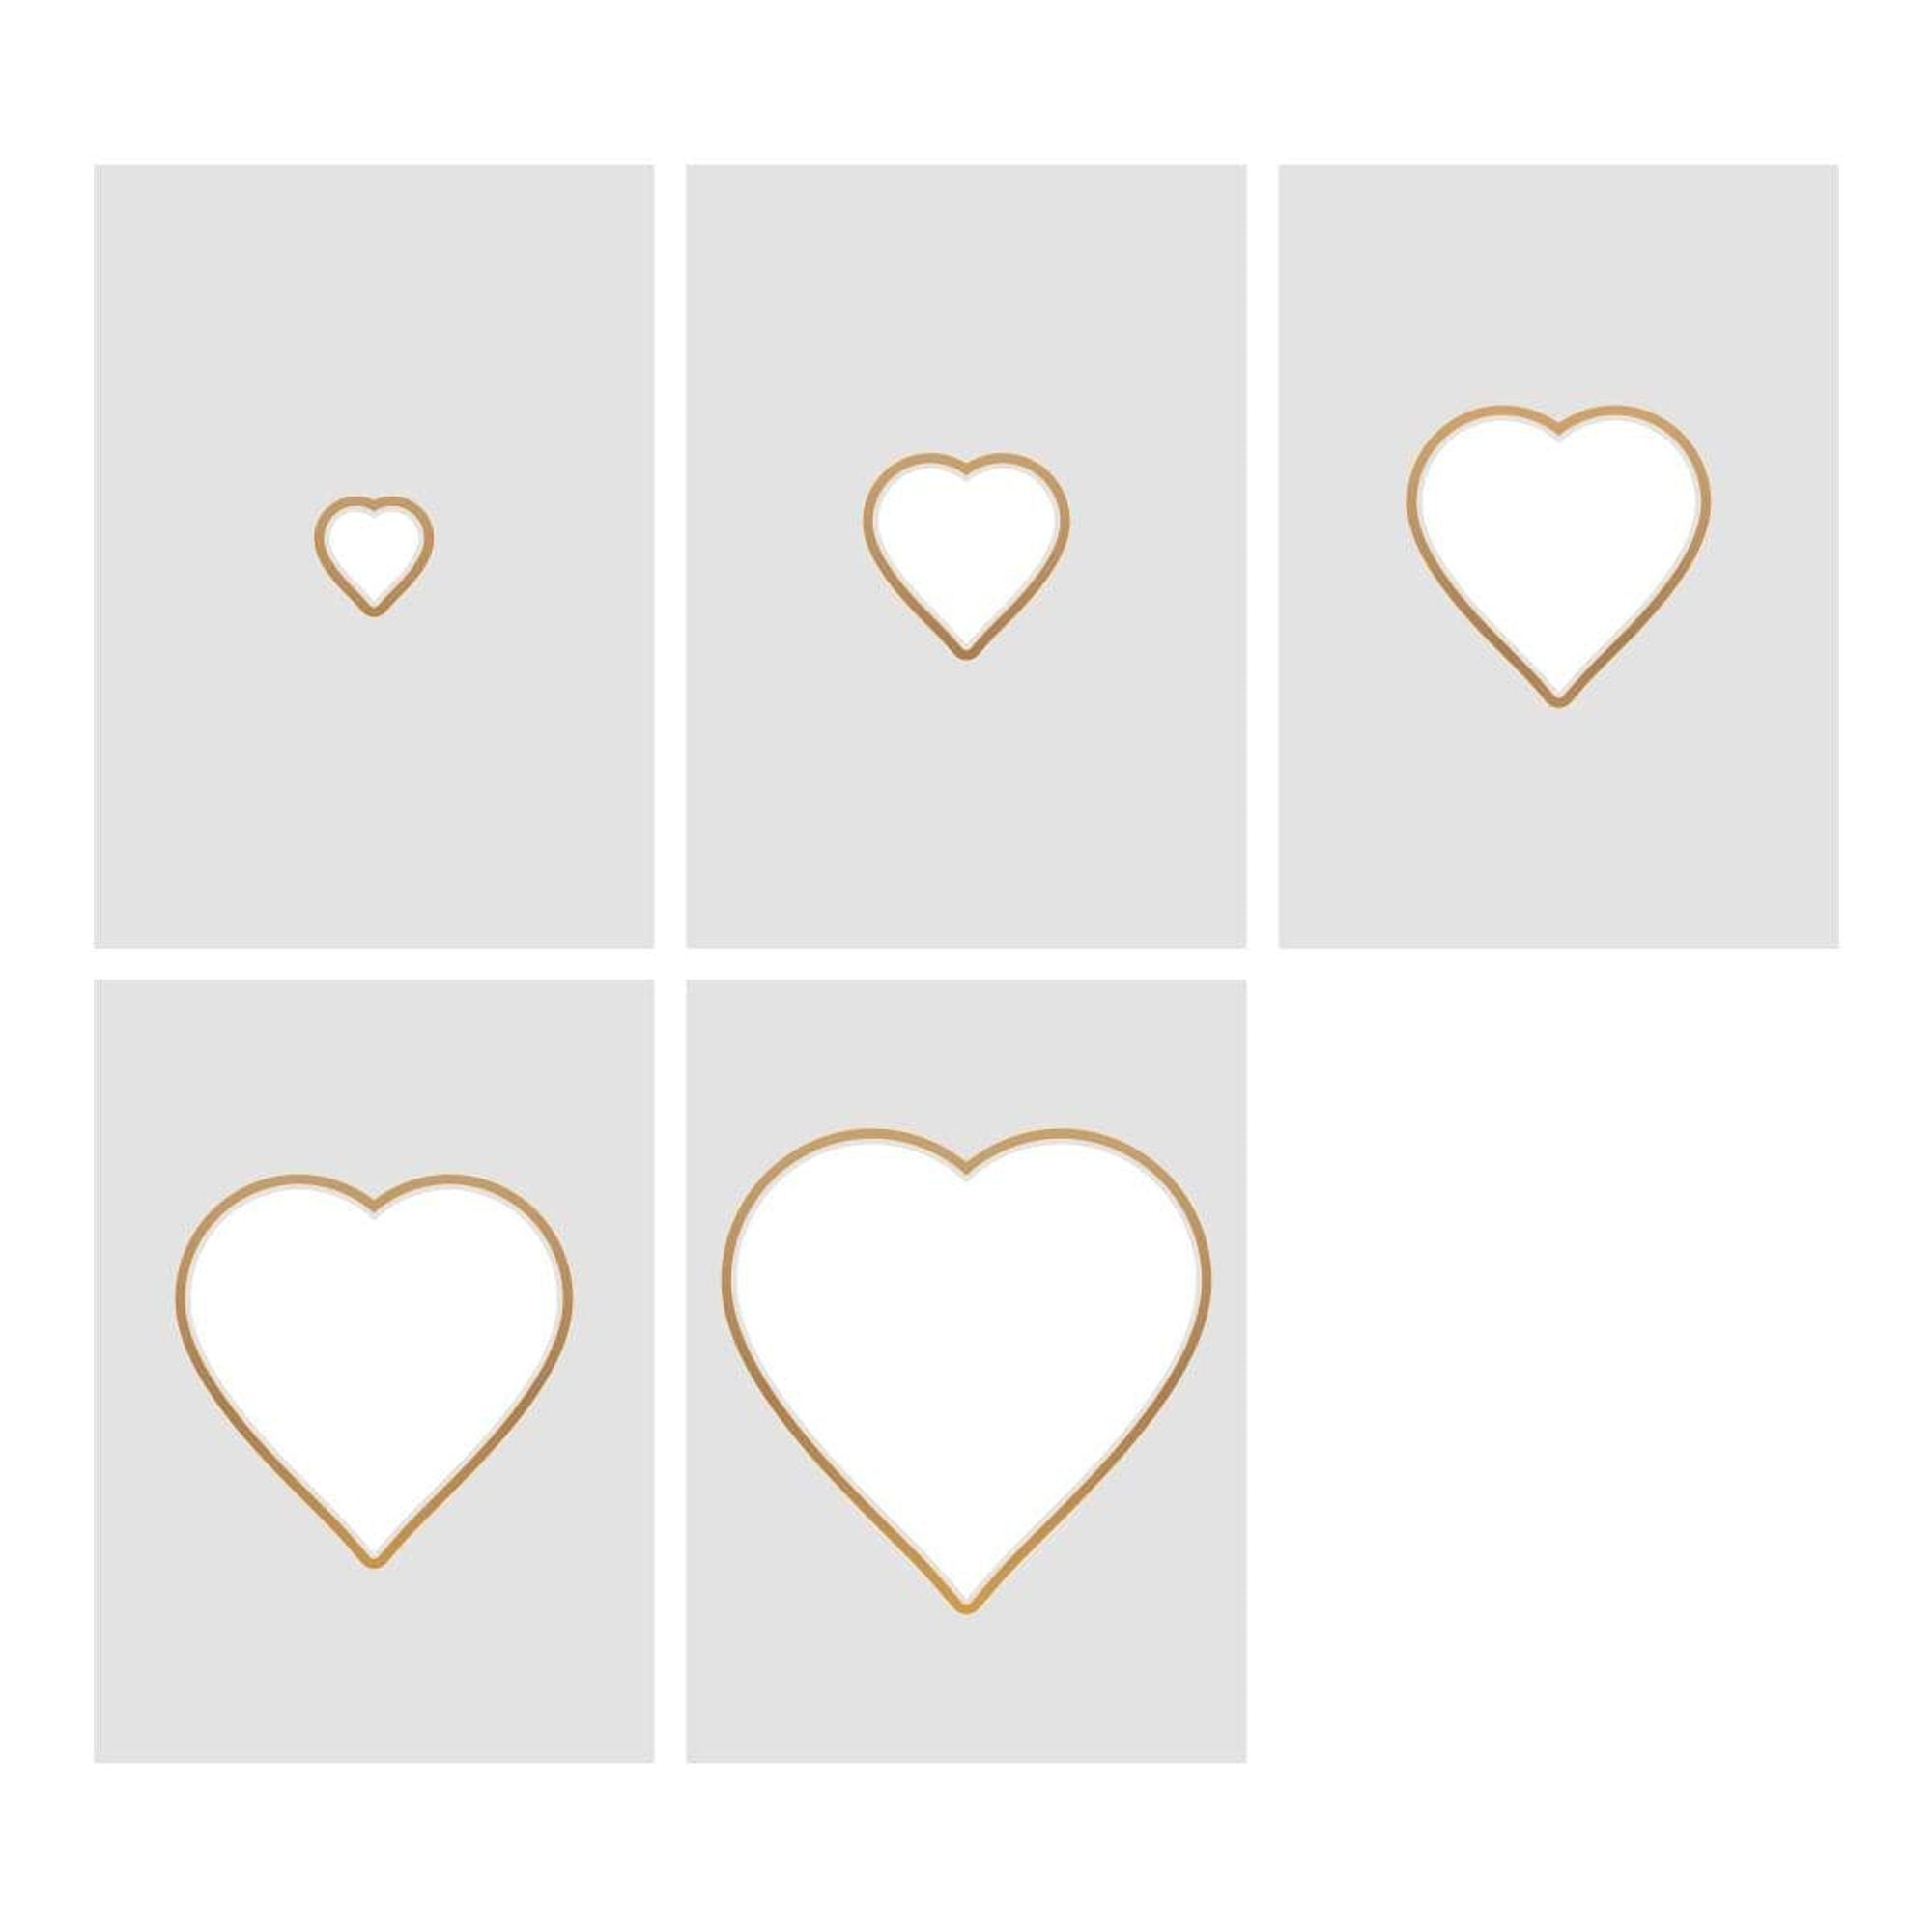 Cut, Foil and Emboss Nesting Negative Hearts - 104 x 103mm | 4 x 4in